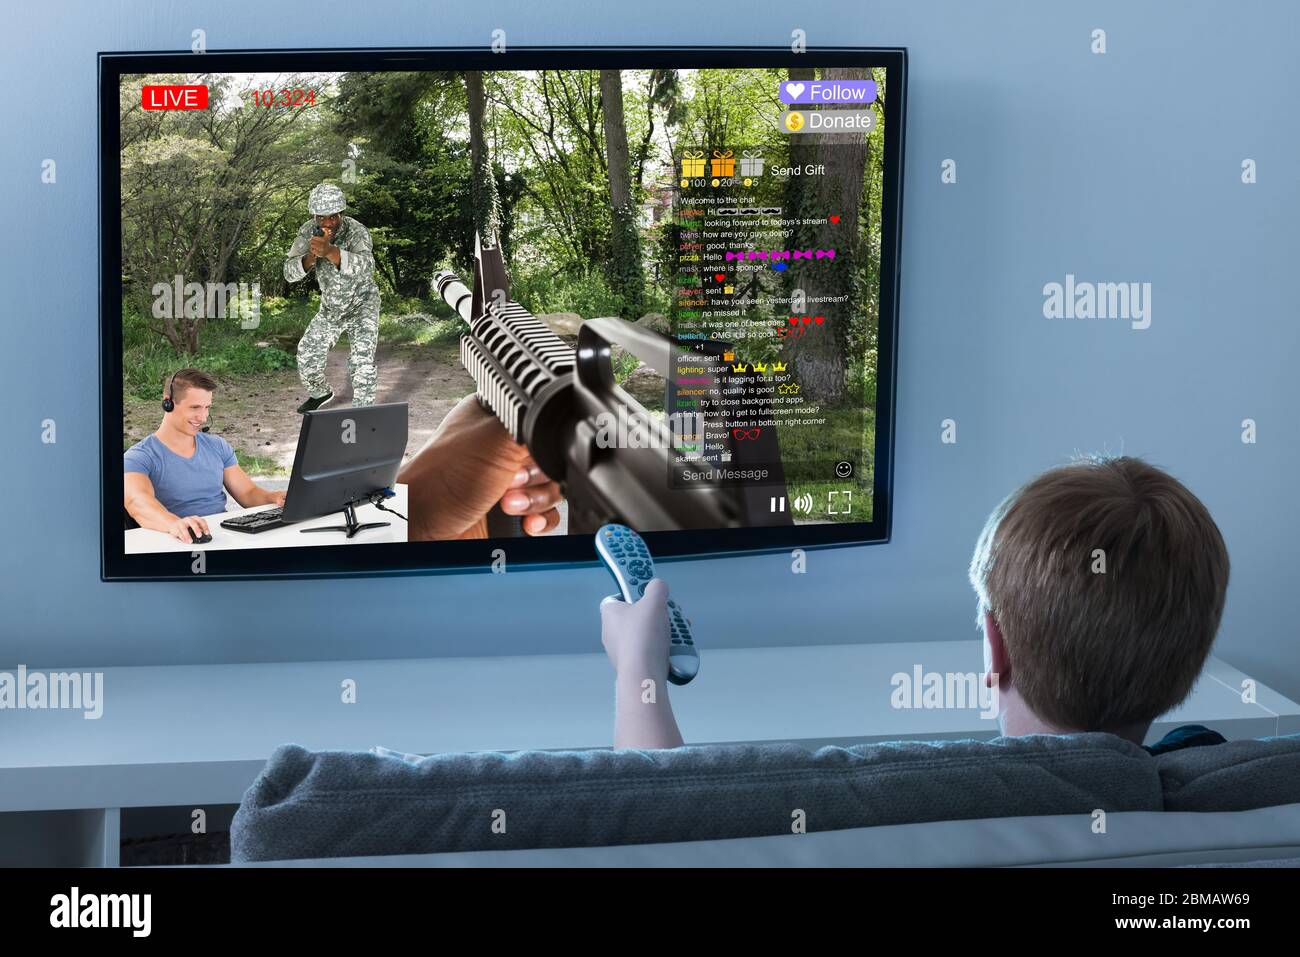 Kid Watching Live Game Streaming Session On TV Screen Stock Photo